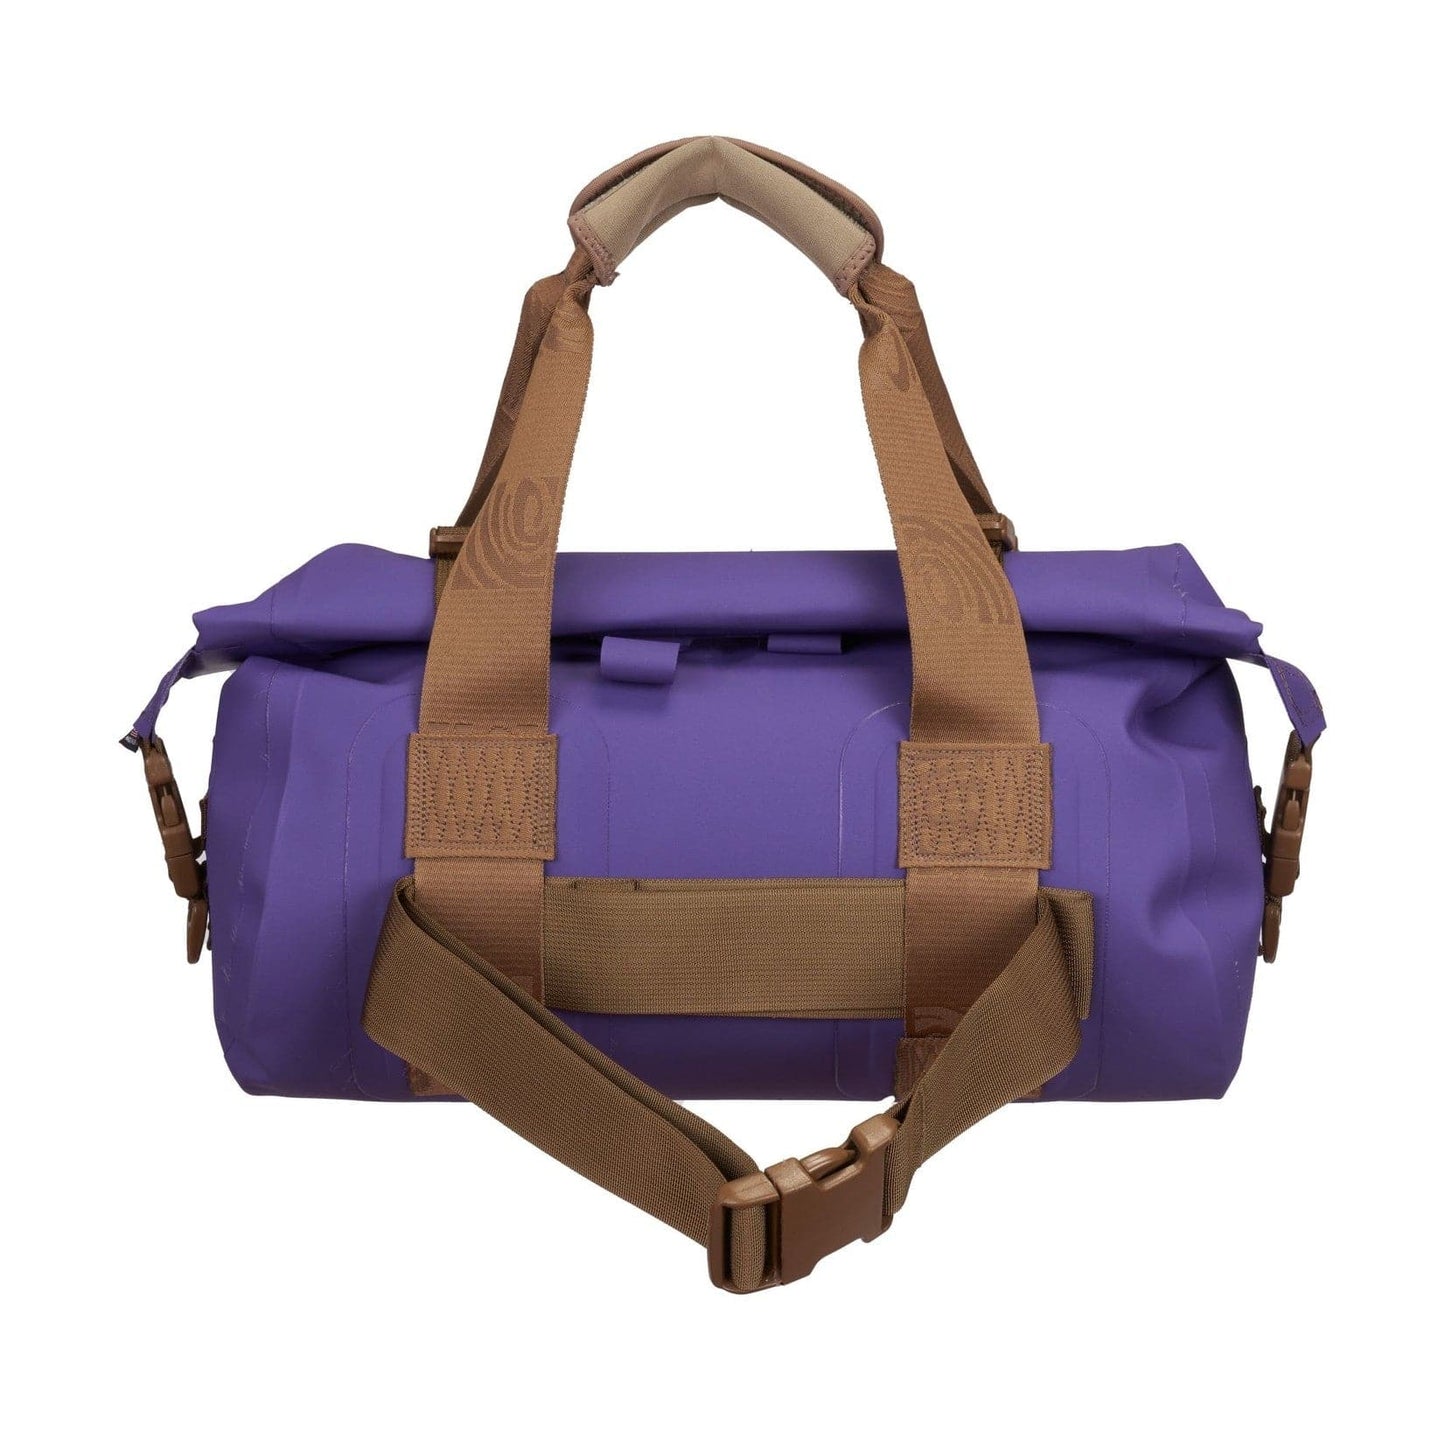 A Watershed Goforth Duffel in purple on a white background.